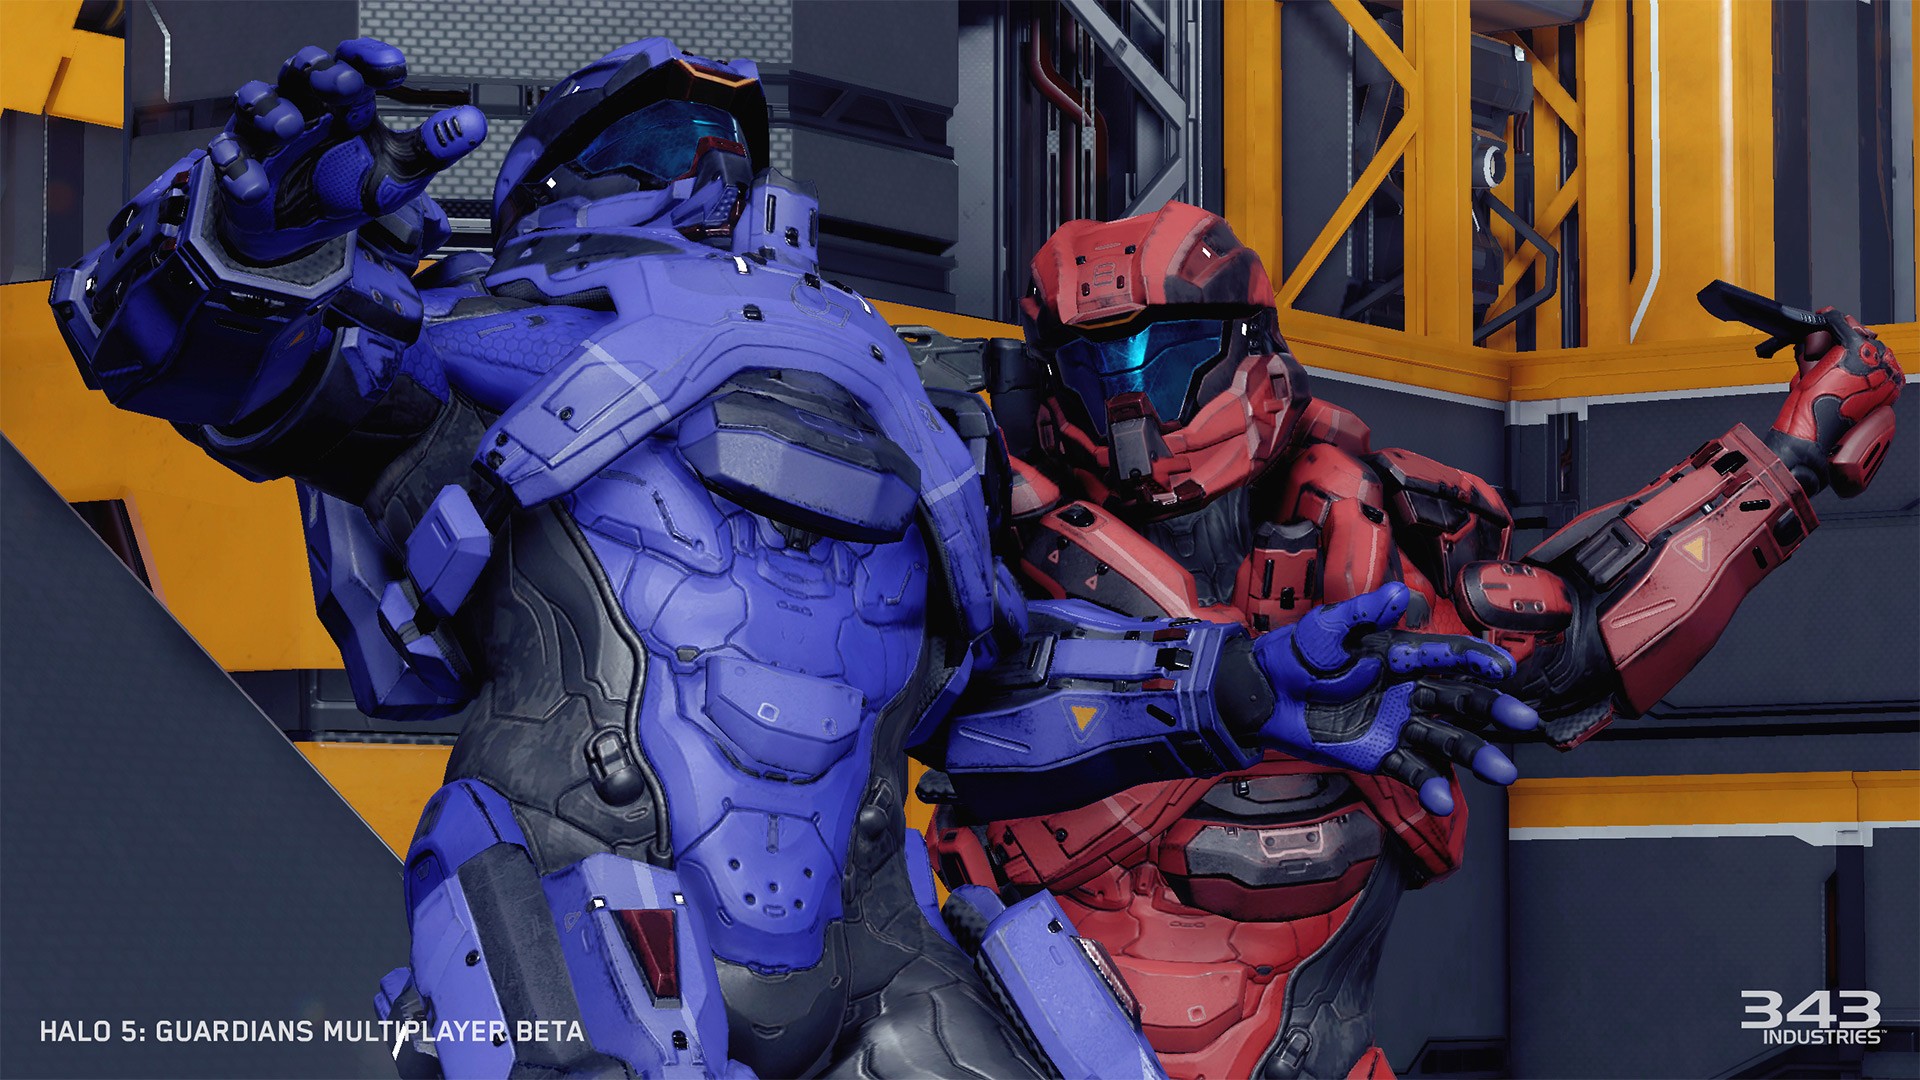 Halo 5 review: Multiplayer restrictions aside, this is another epic game  from Microsoft – GeekWire